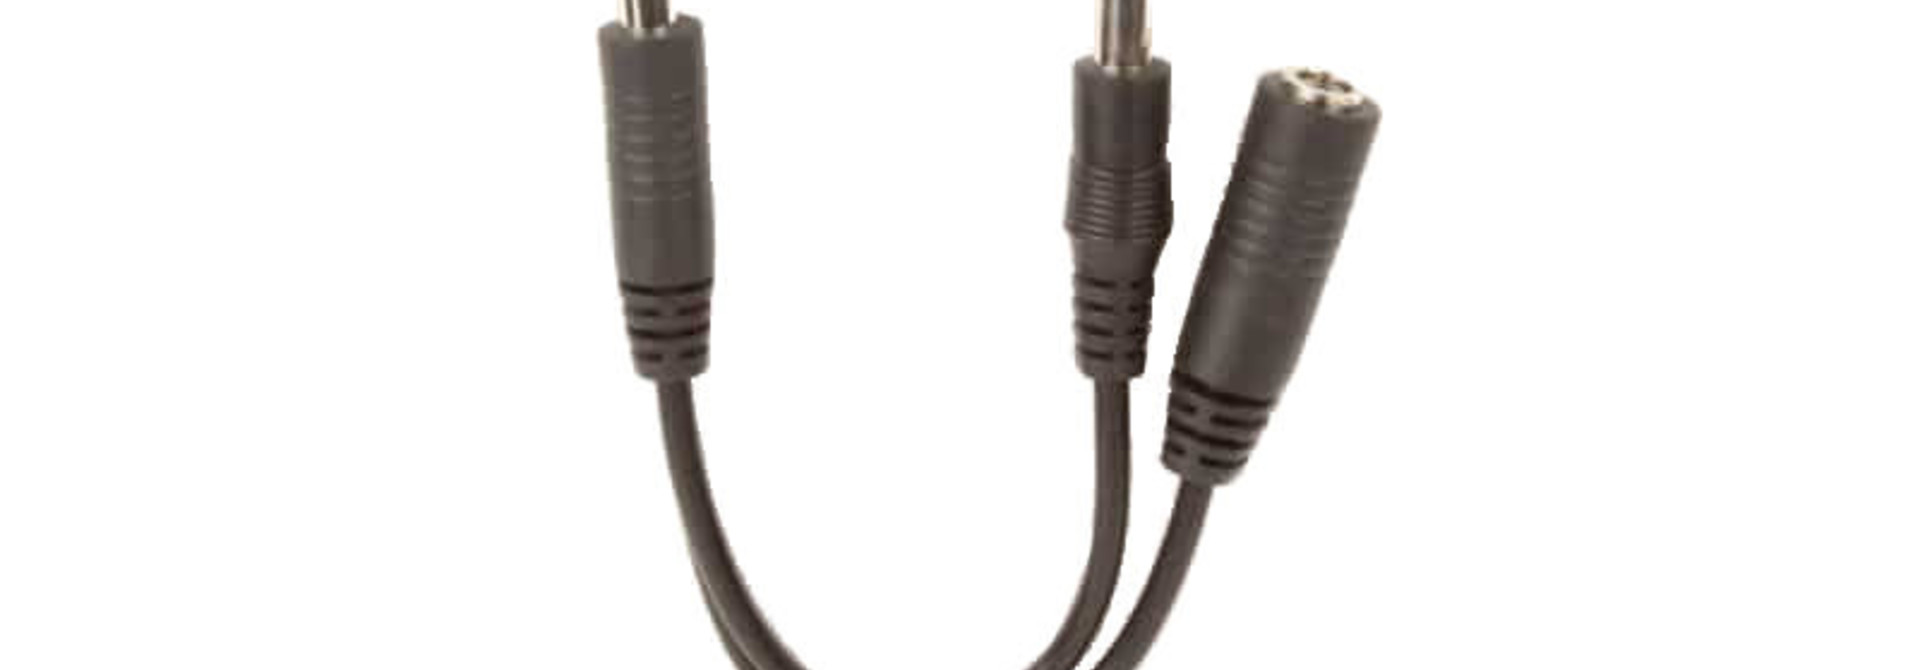 Strymon Accessory Power Cable - Voltage Doubling , 2.1mm ID, 4" 102mm (New - Out of package)